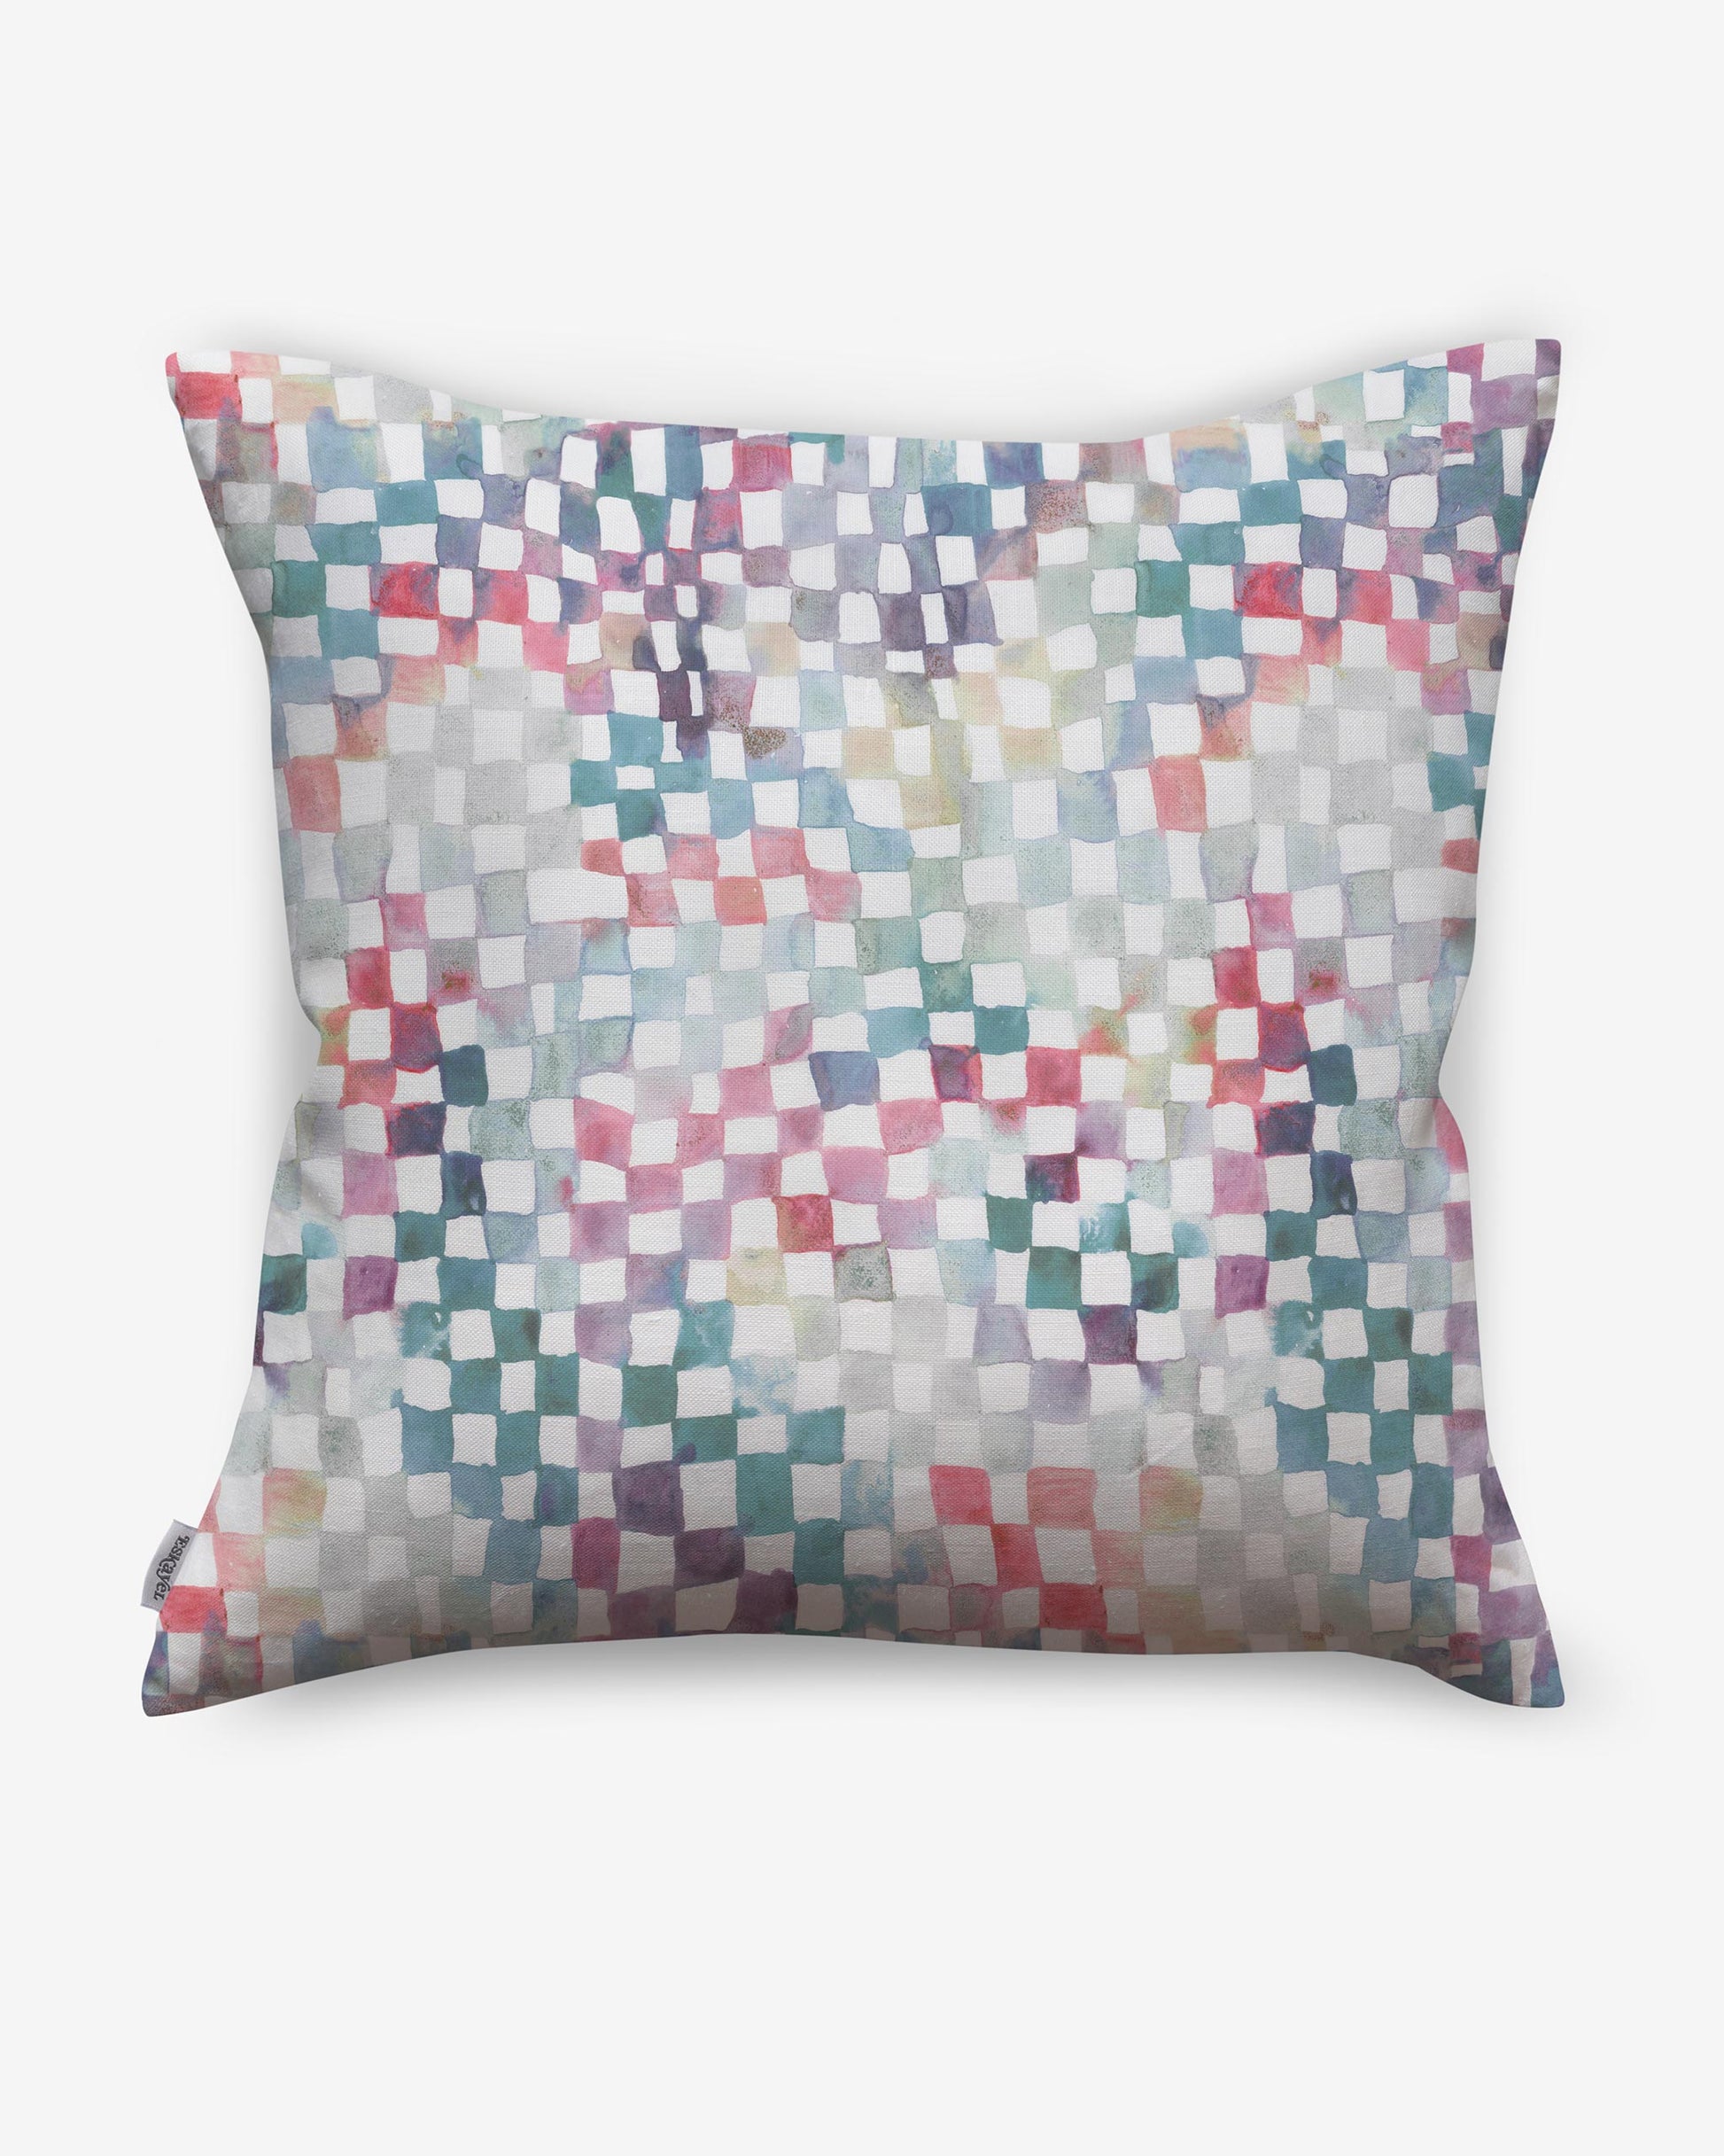 A colorful Chess Pillow with a checkerboard motif